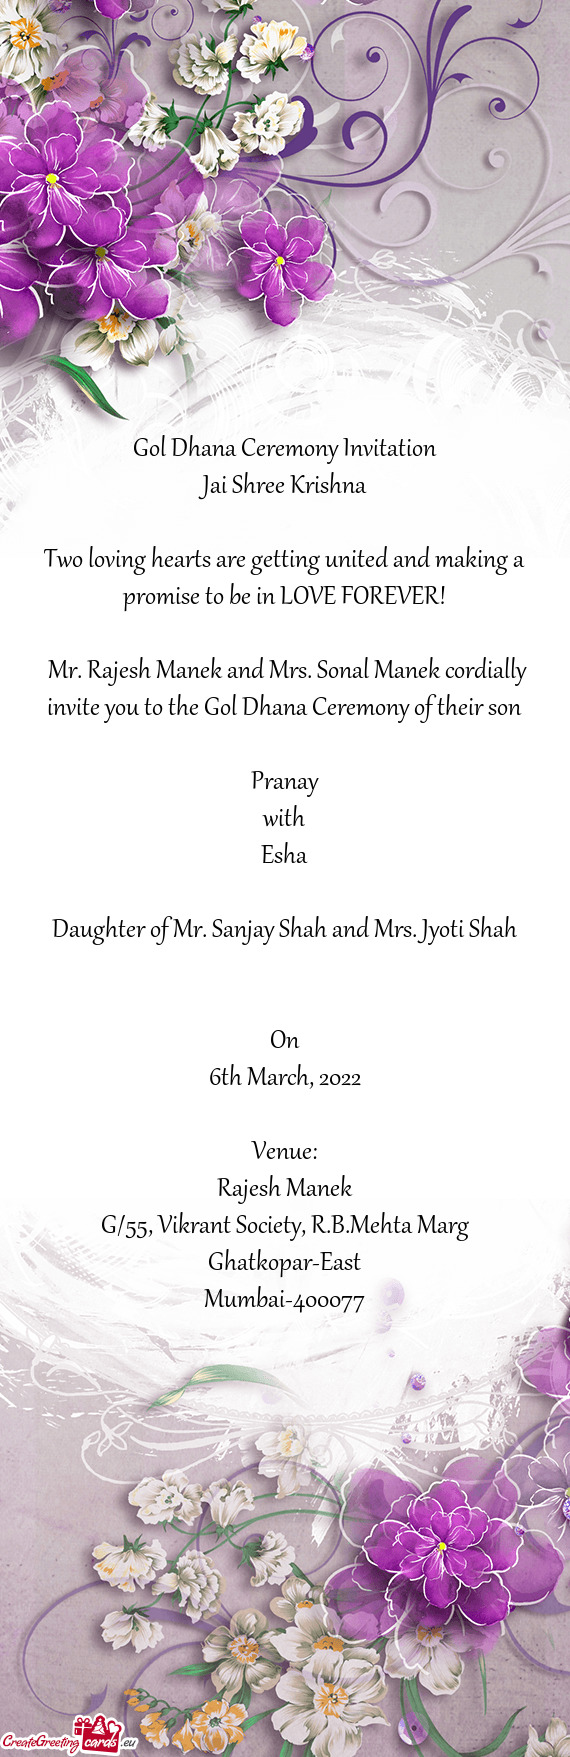 Mr. Rajesh Manek and Mrs. Sonal Manek cordially invite you to the Gol Dhana Ceremony of their son